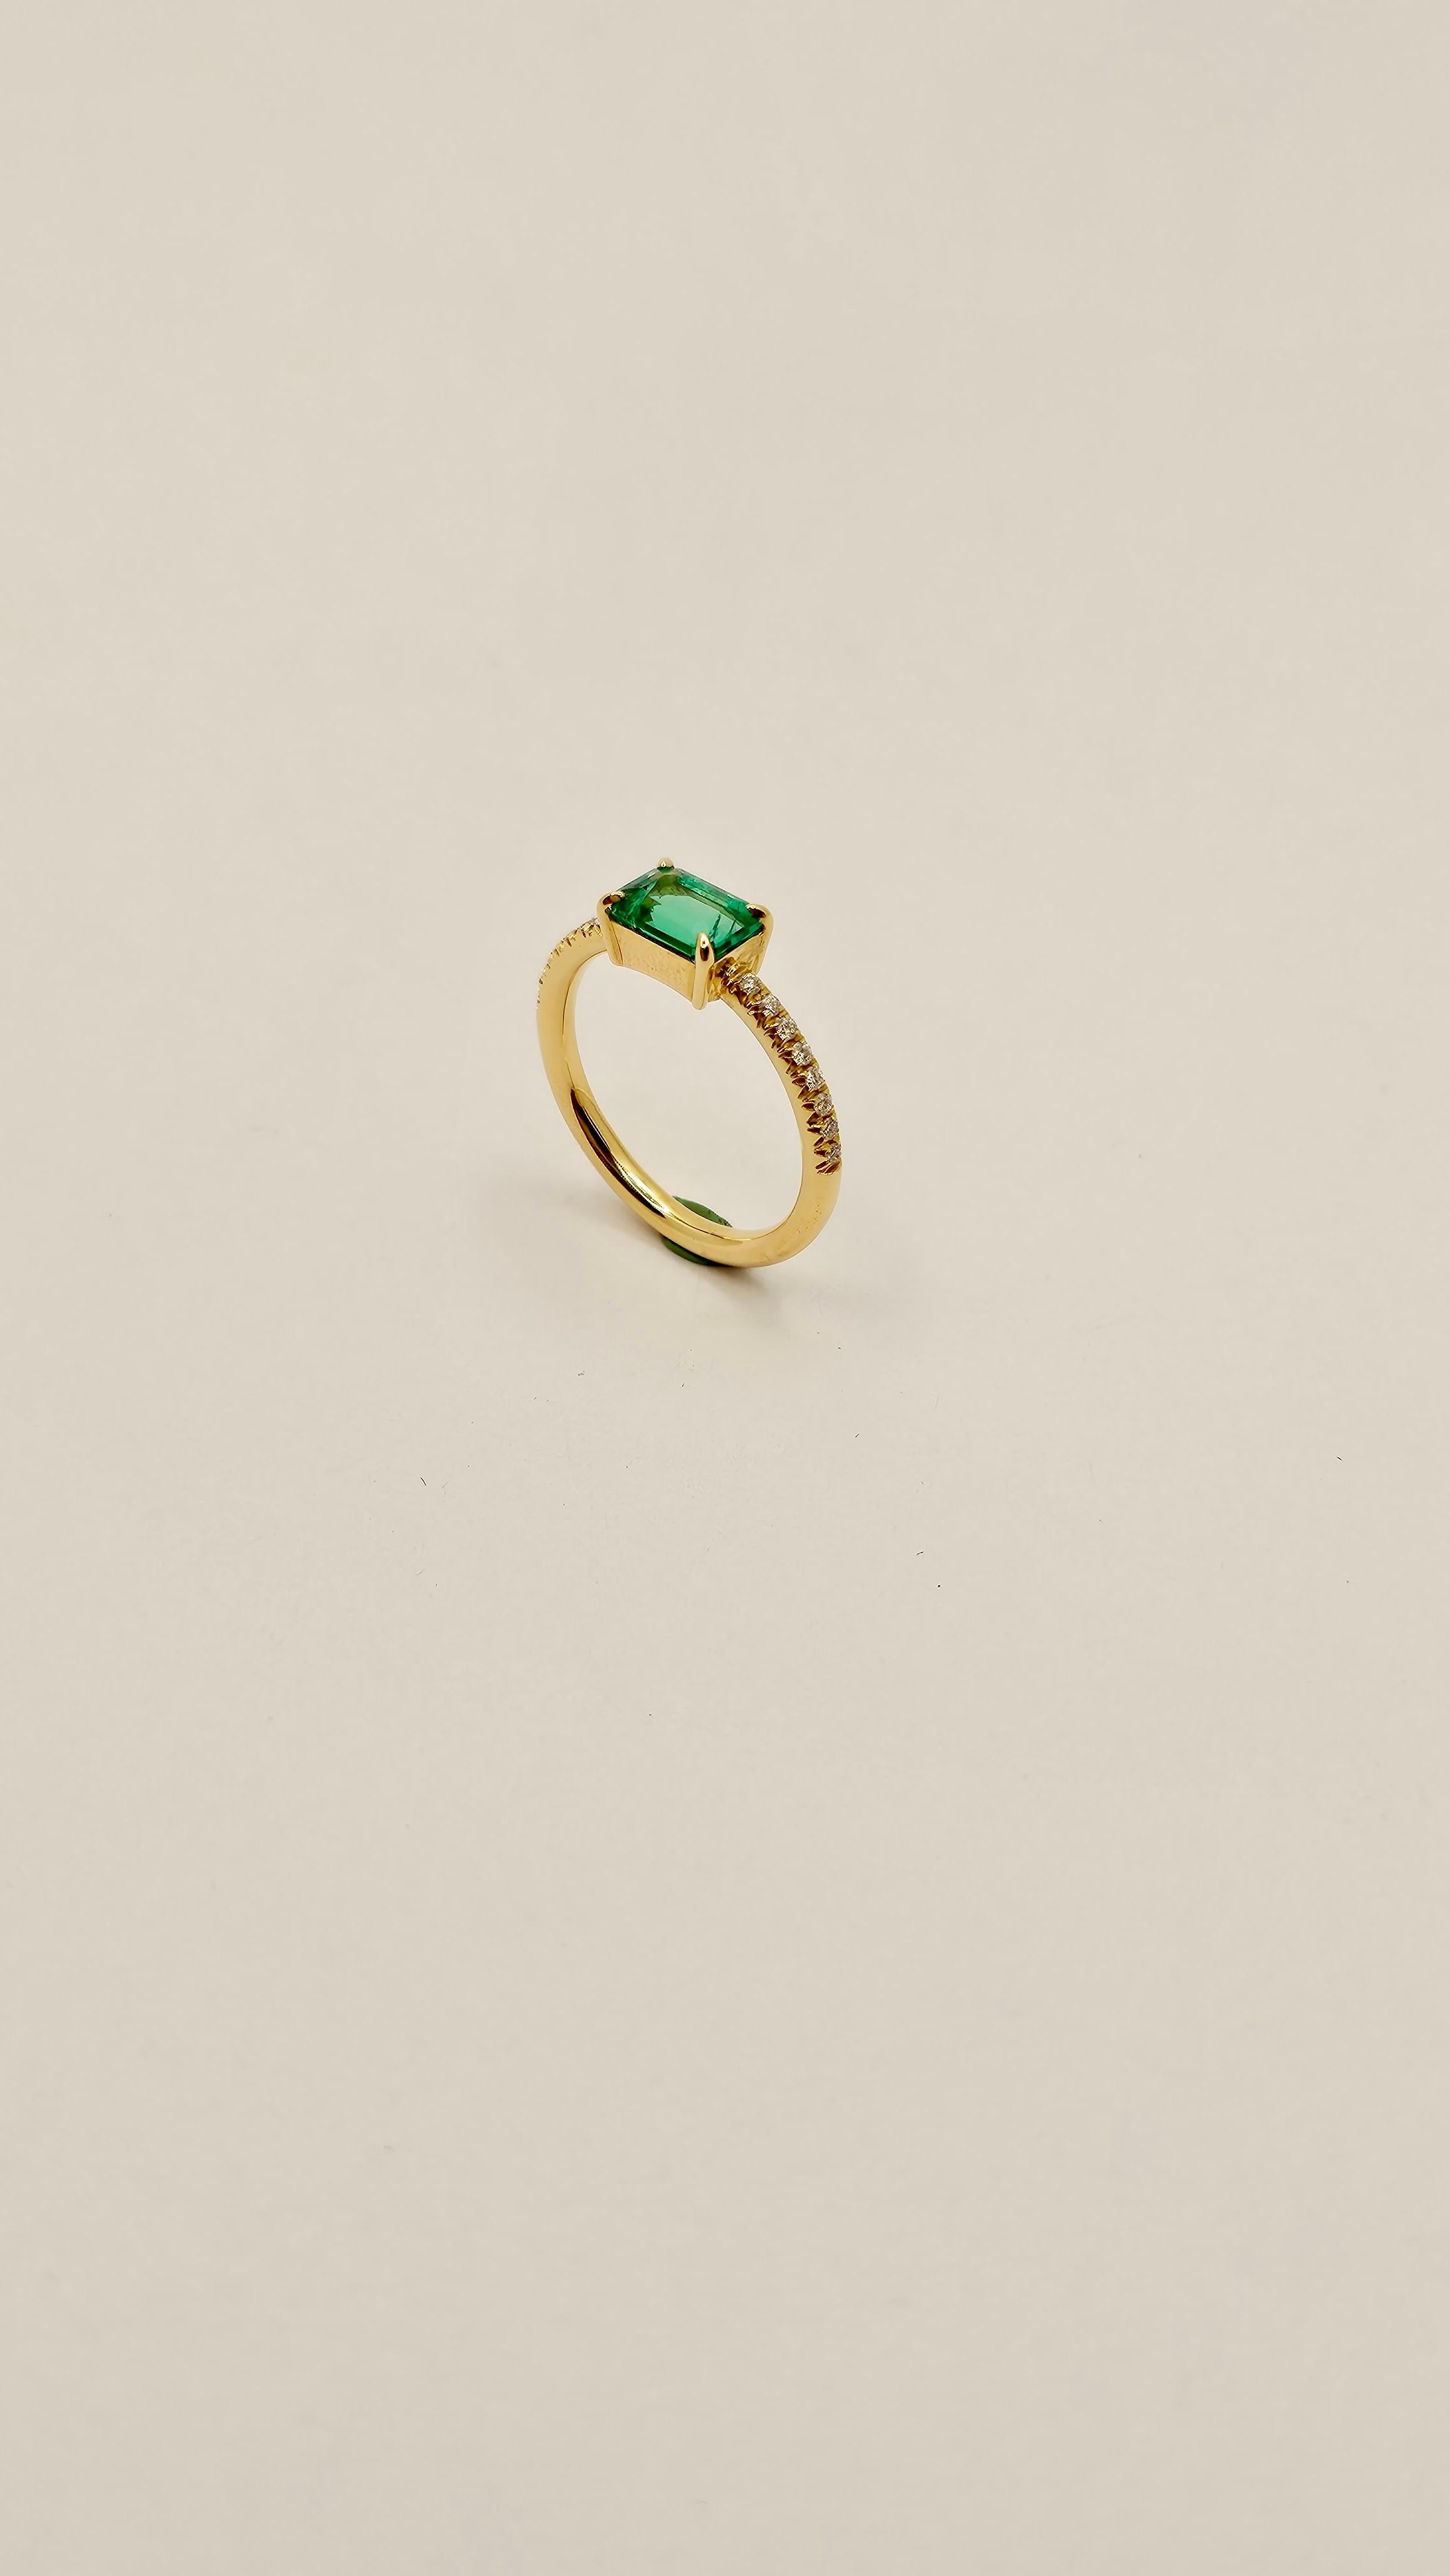 A jewelry classic with modern details such as the choice to make it in 18 kt yellow gold.
The center stone is a rectangular-cut Emerald, mm 5x7, which has very few inclusions within it and a bright, light green color.
The band is embellished with